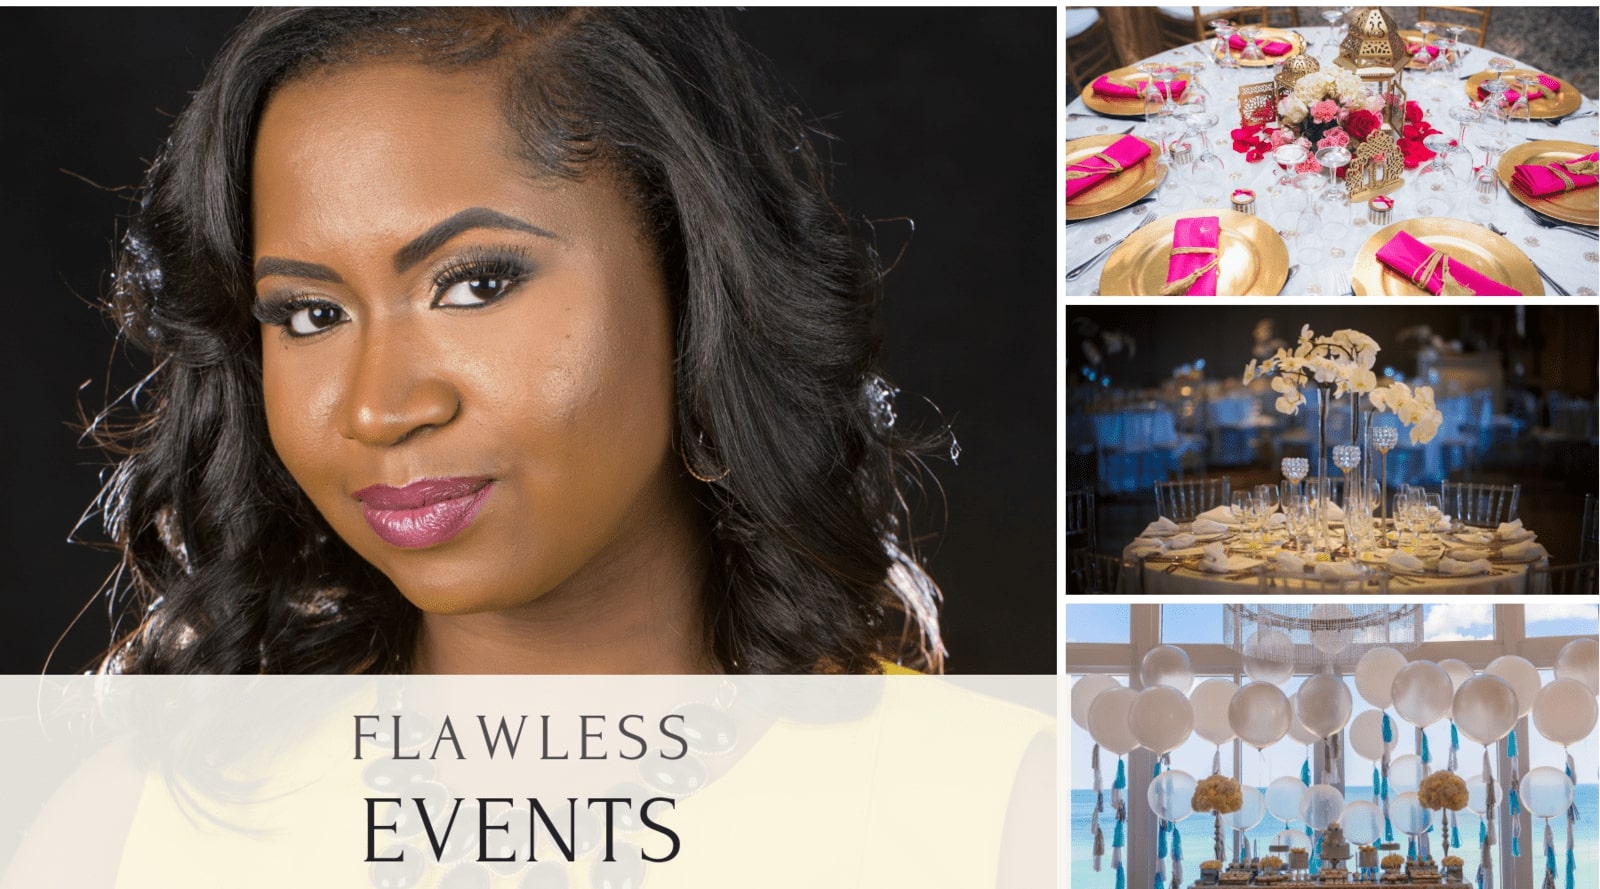 Today's Expert: Merlyn Donatien from Flawless Events